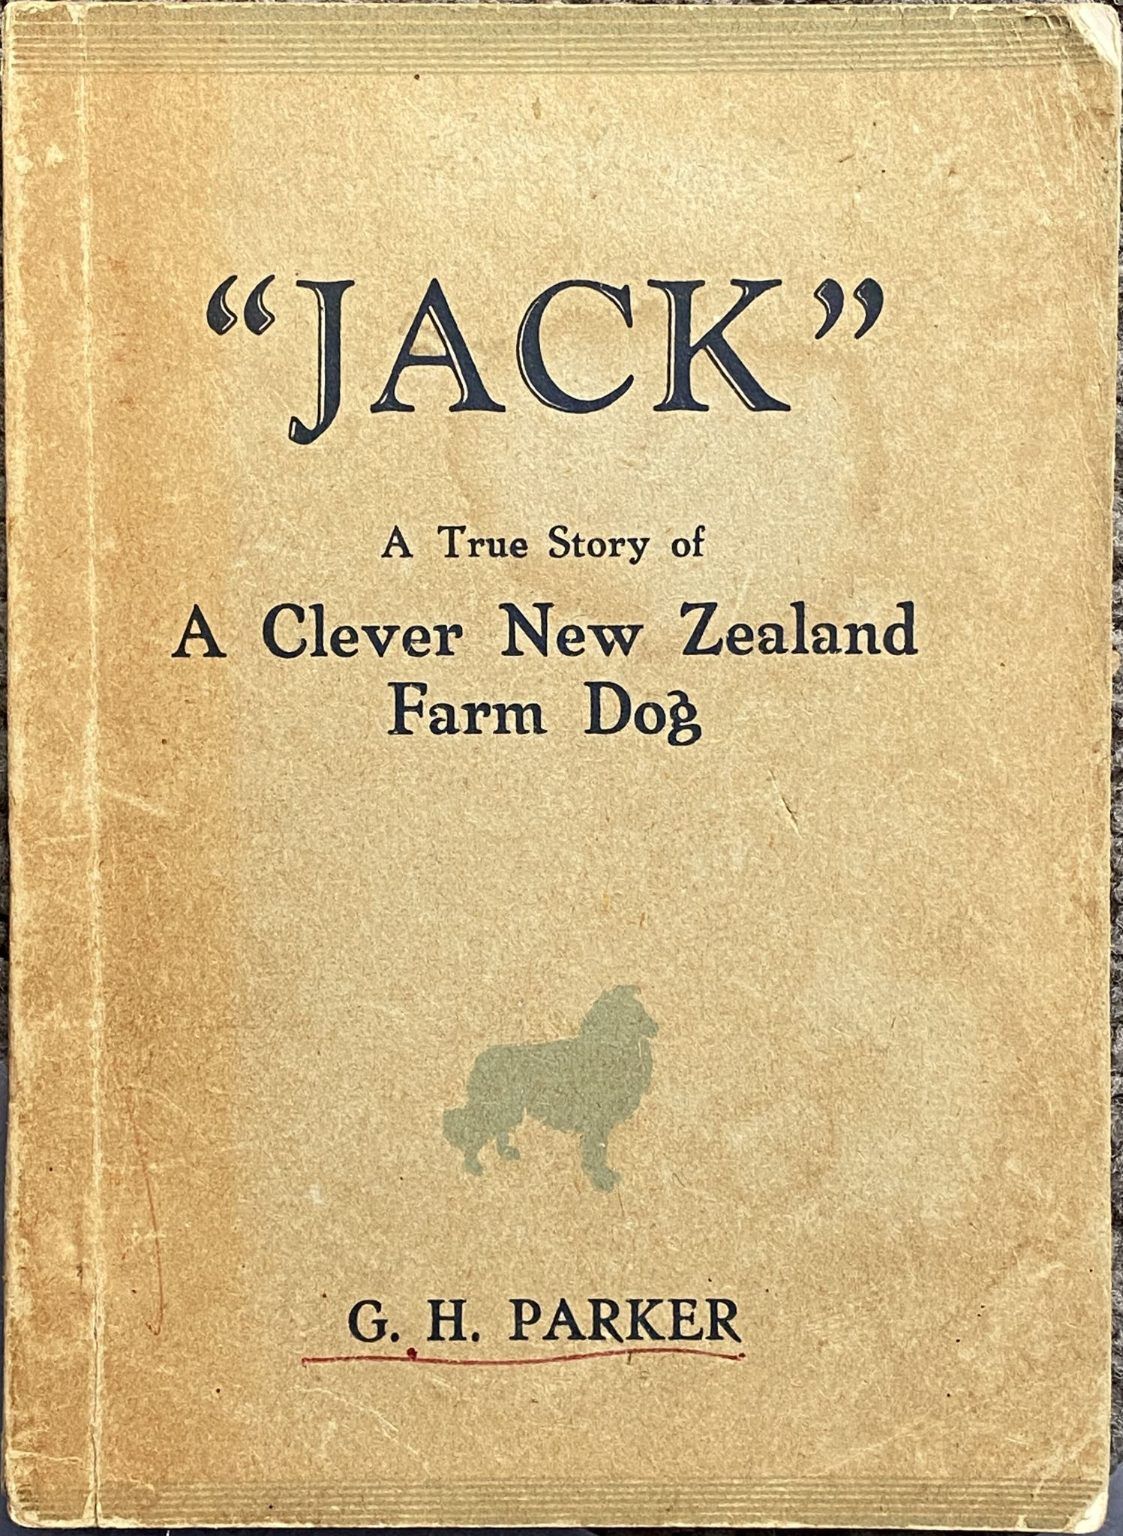 JACK - A True Story of a Clever New Zealand Farm Dog